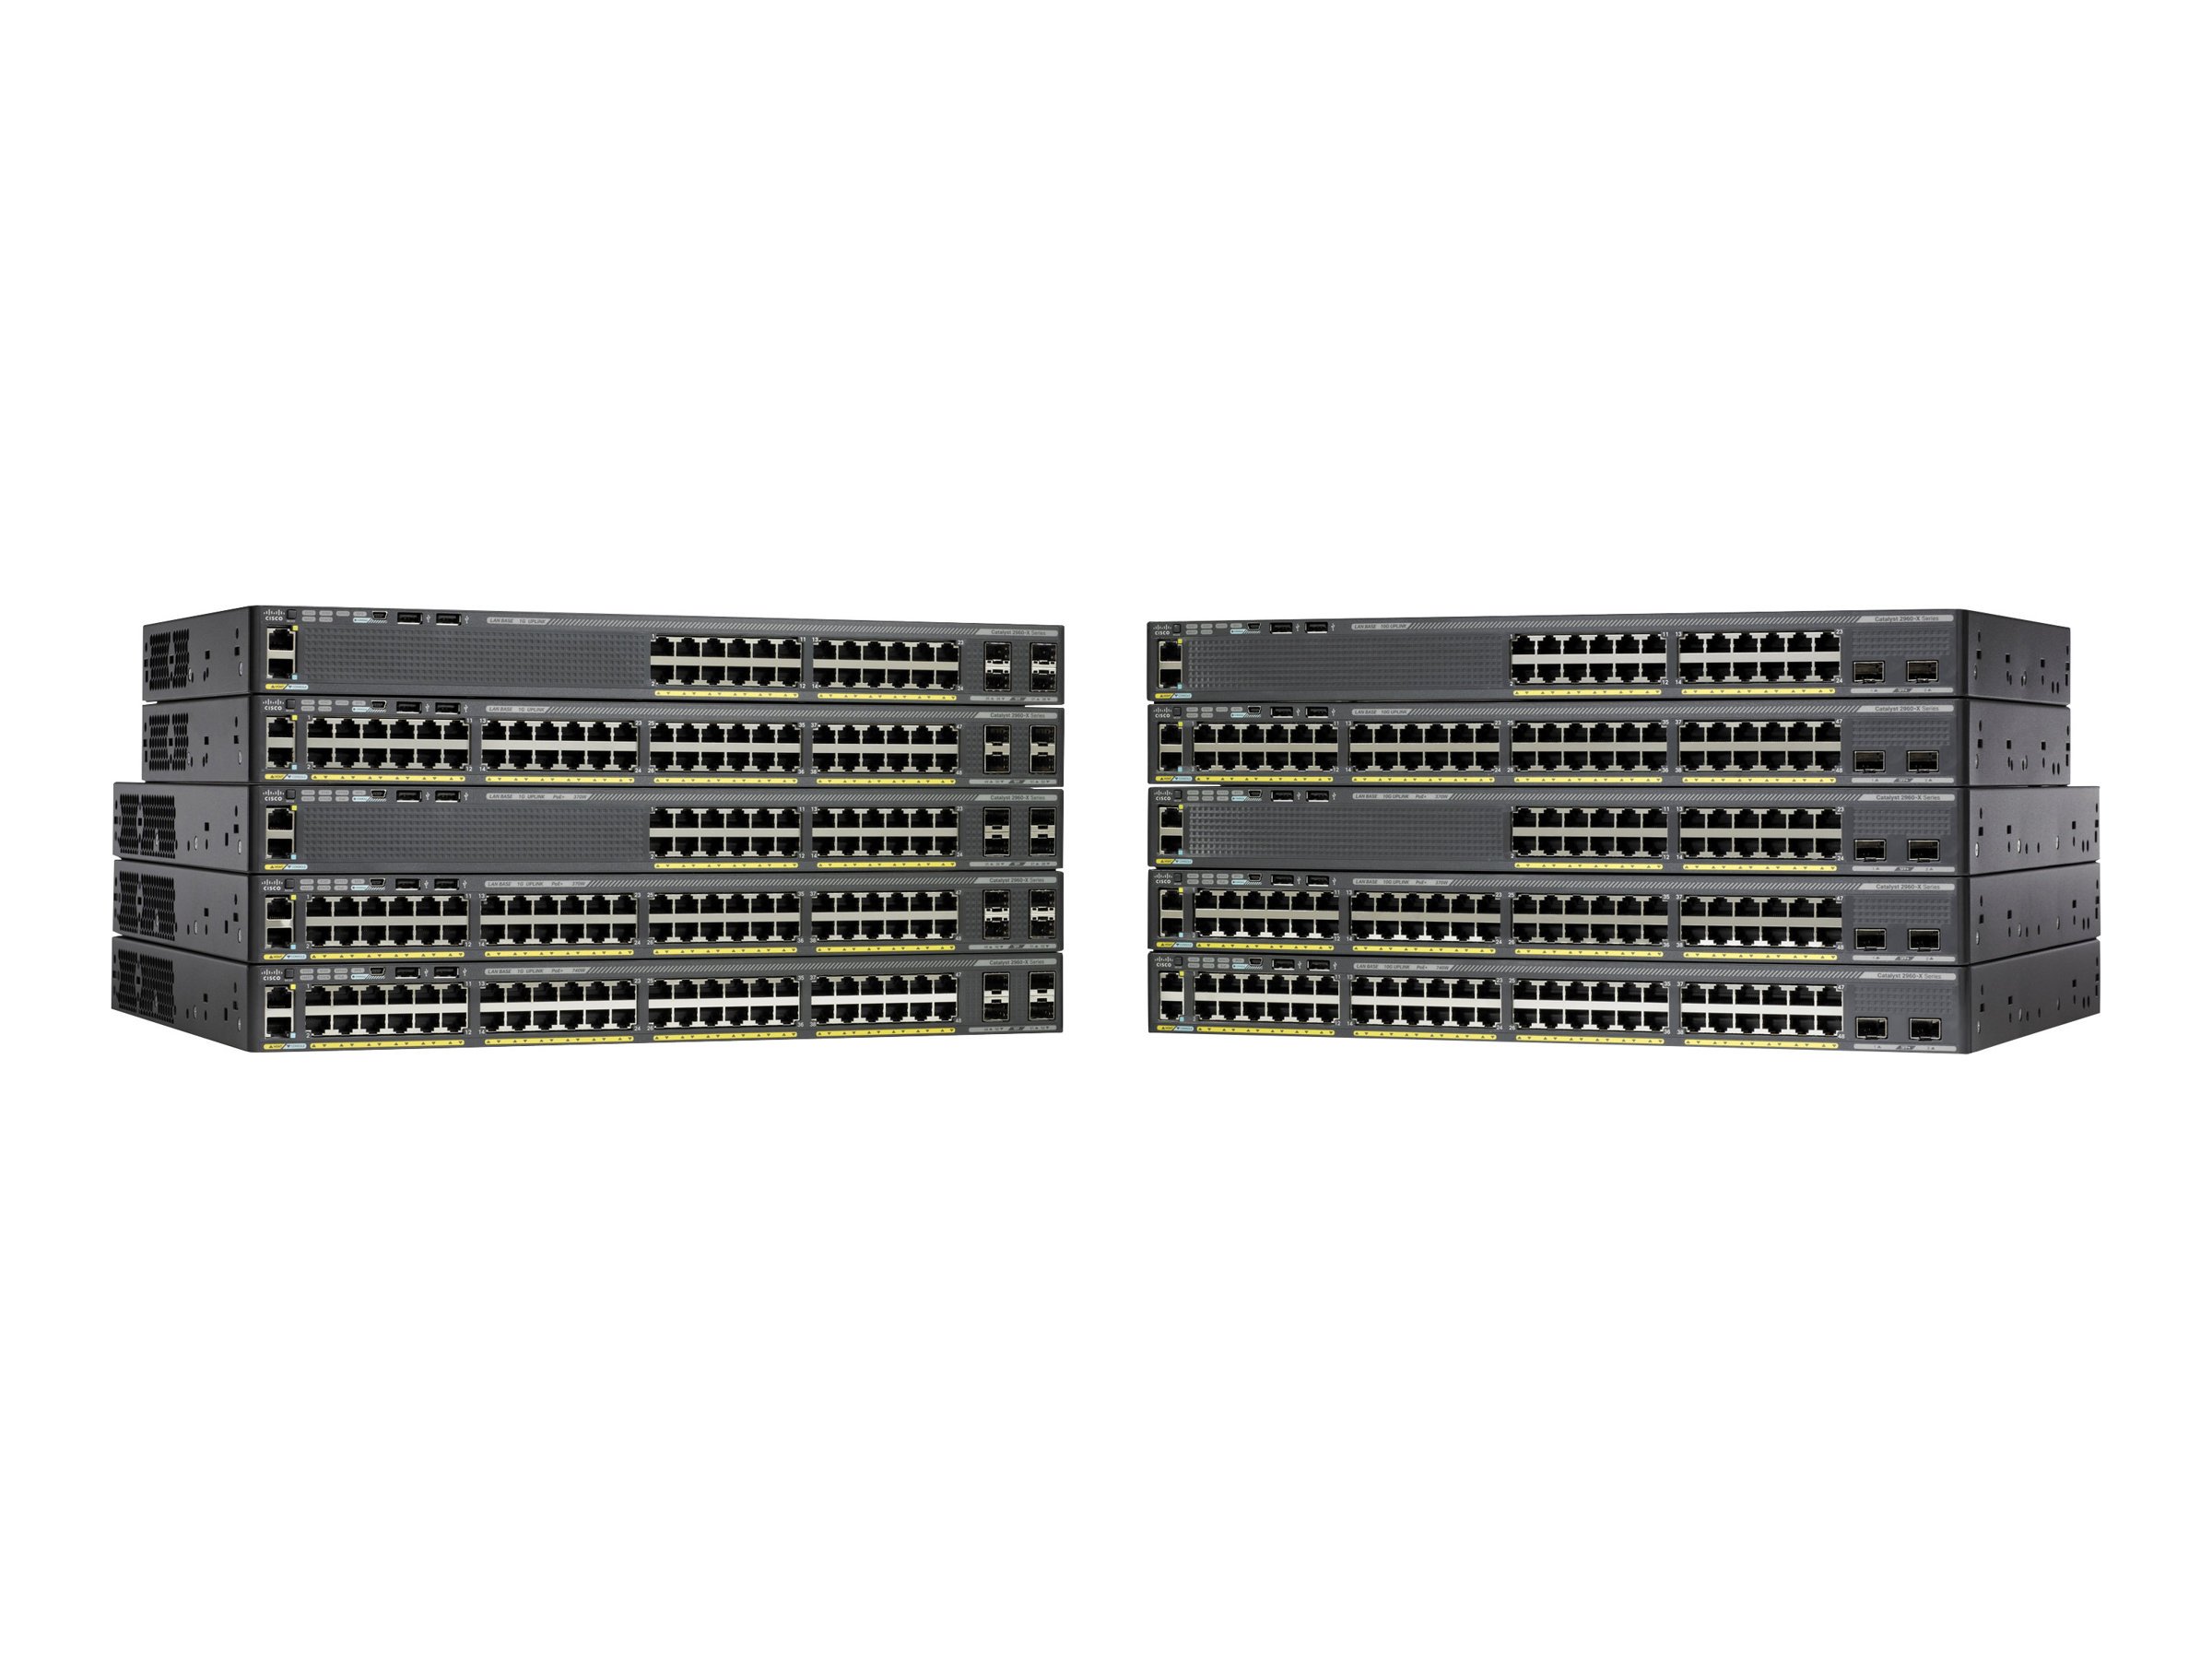 Cisco Catalyst 2960XR-48FPD-I Switch (WS-C2960XR-48FPD-I)